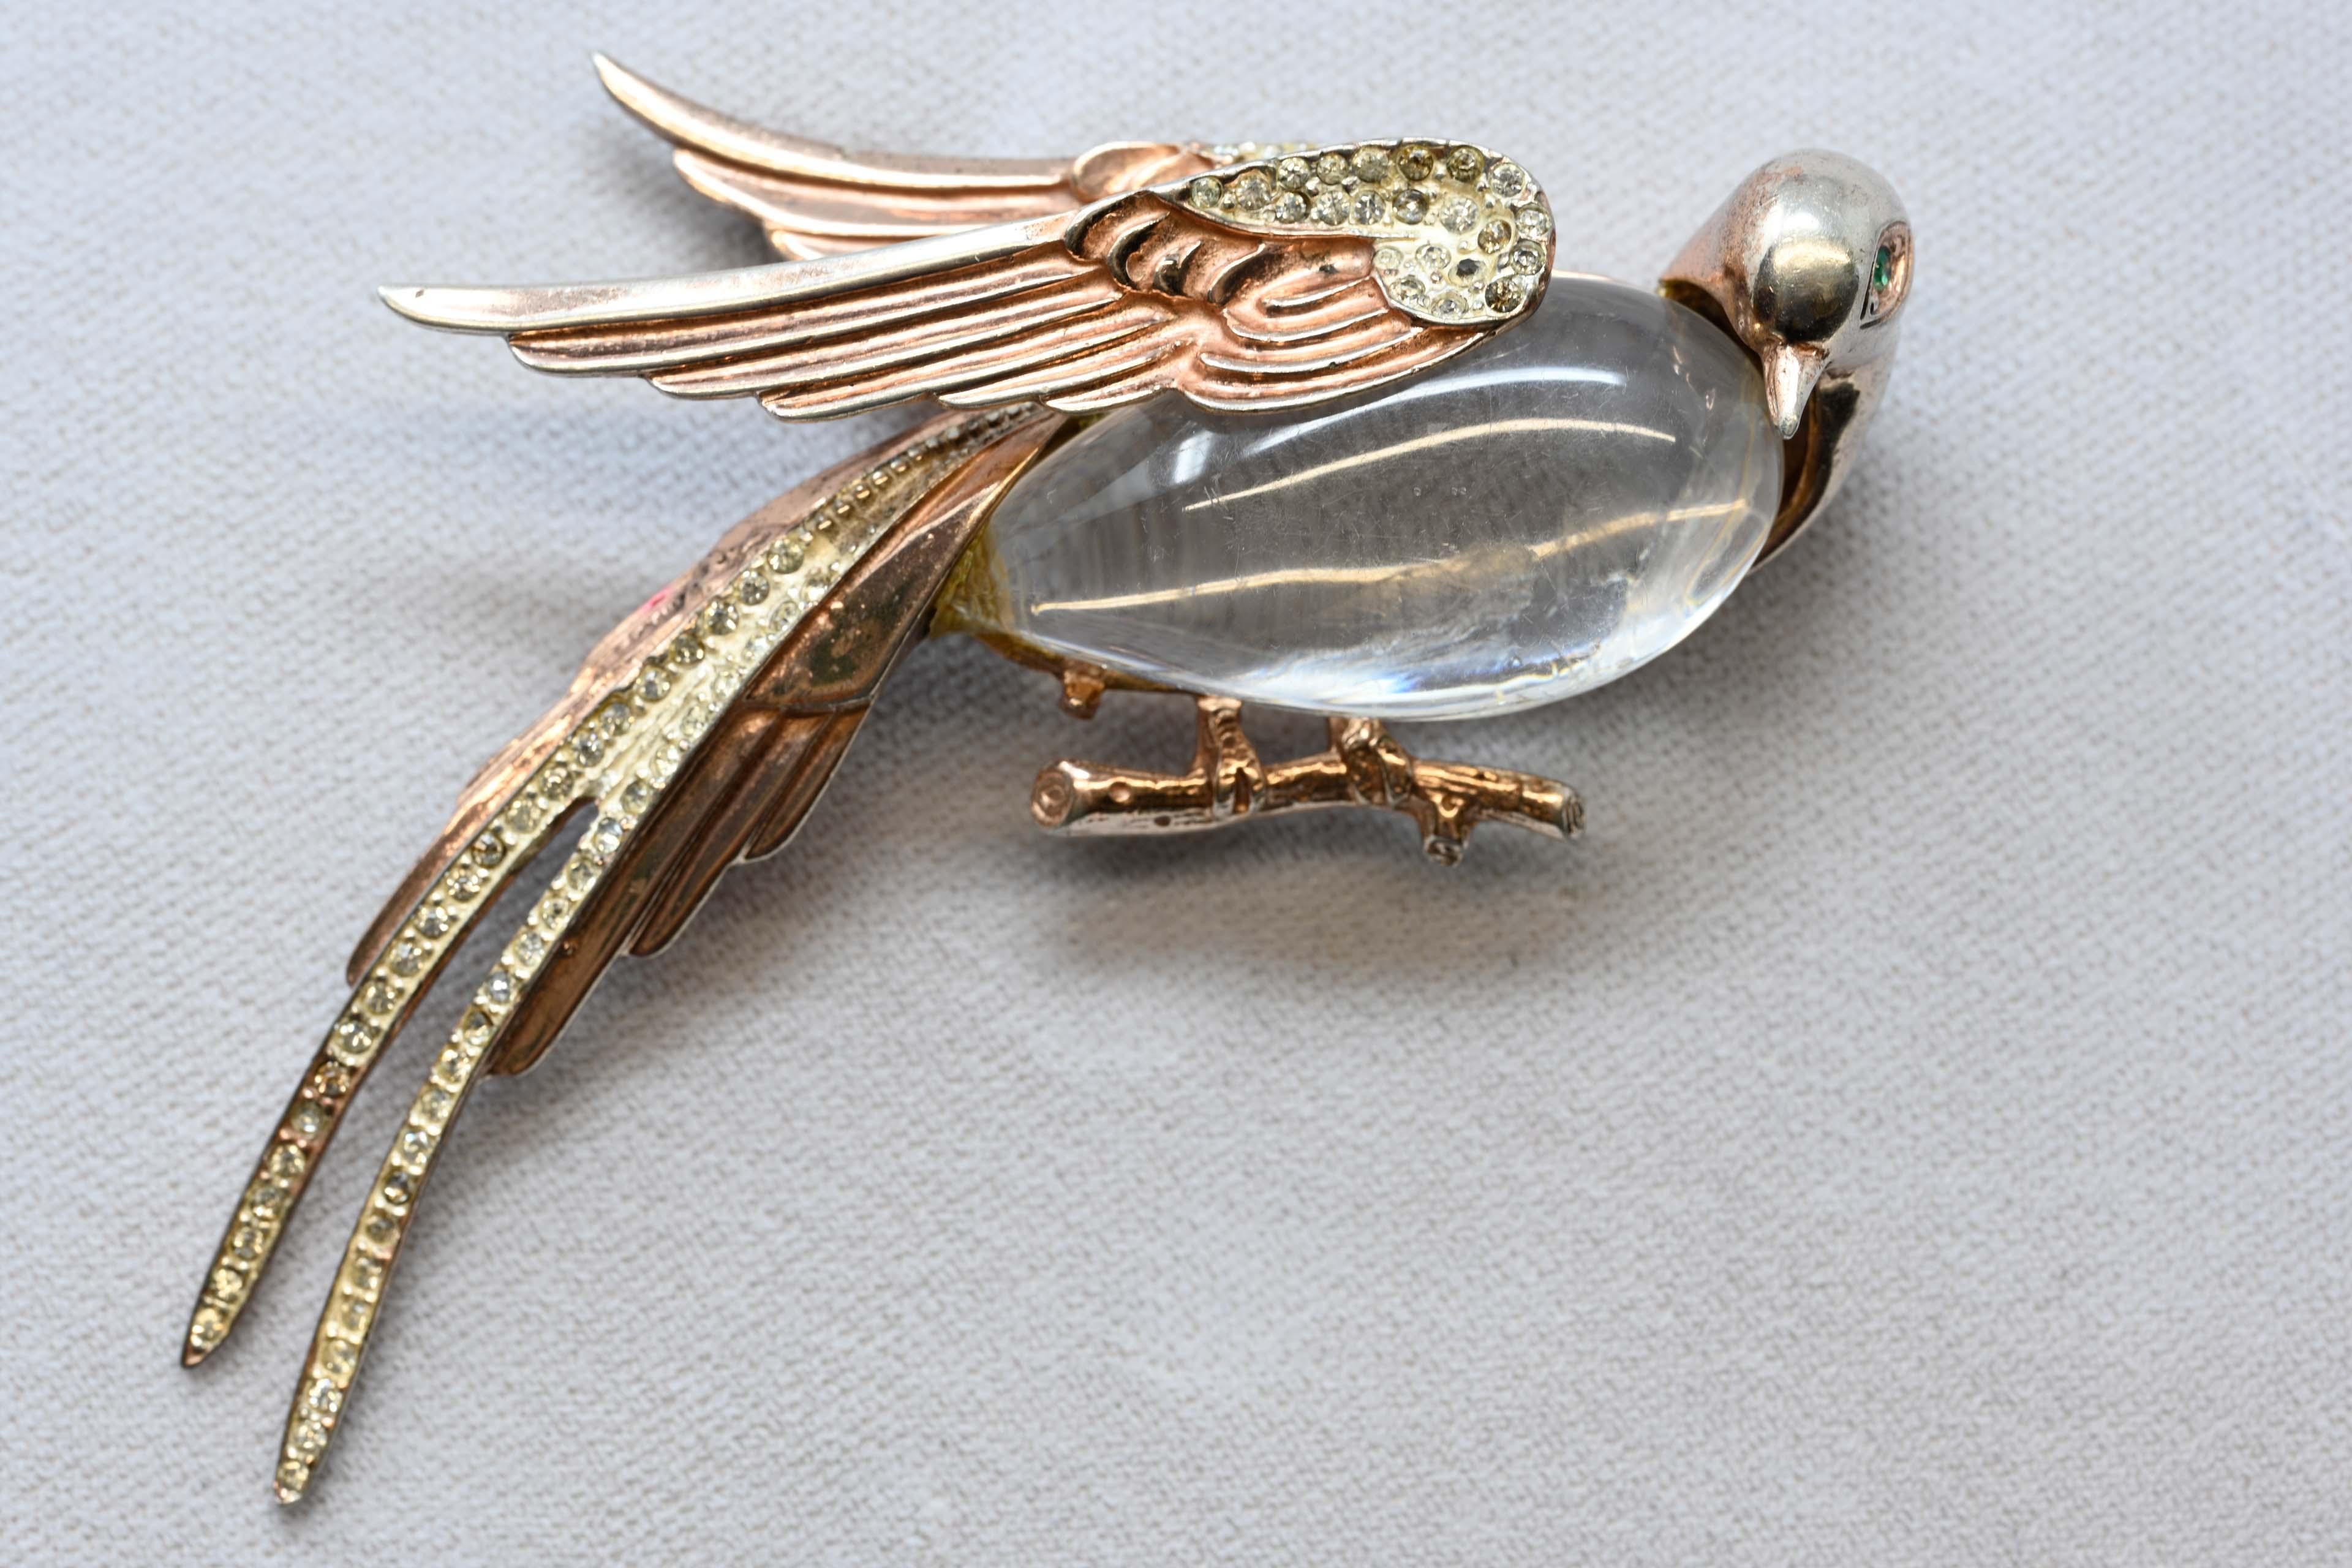 Signed sterling Corocraft jelly belly lucite rhinestones & silver goldplated brooch. With the Pegasus mark, made in the USA and designed by Adolph Katz circa 1944. The brooch is preowned, measures 3 3/4 inches long x 2 1/4 inches tall, in very good